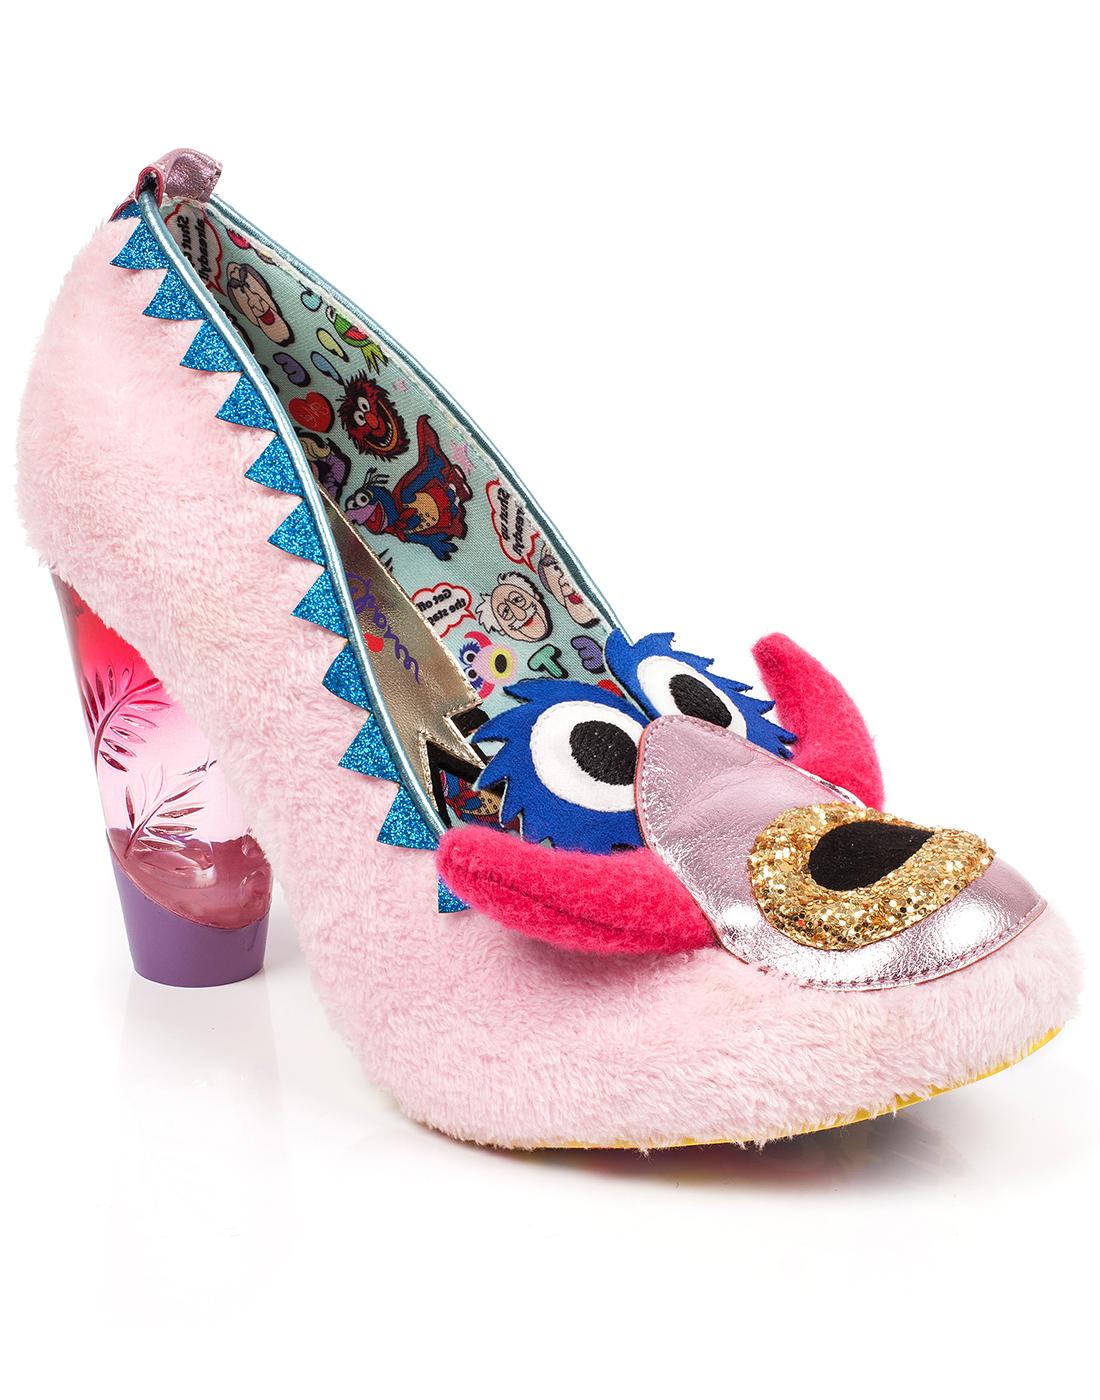 muppet shoes